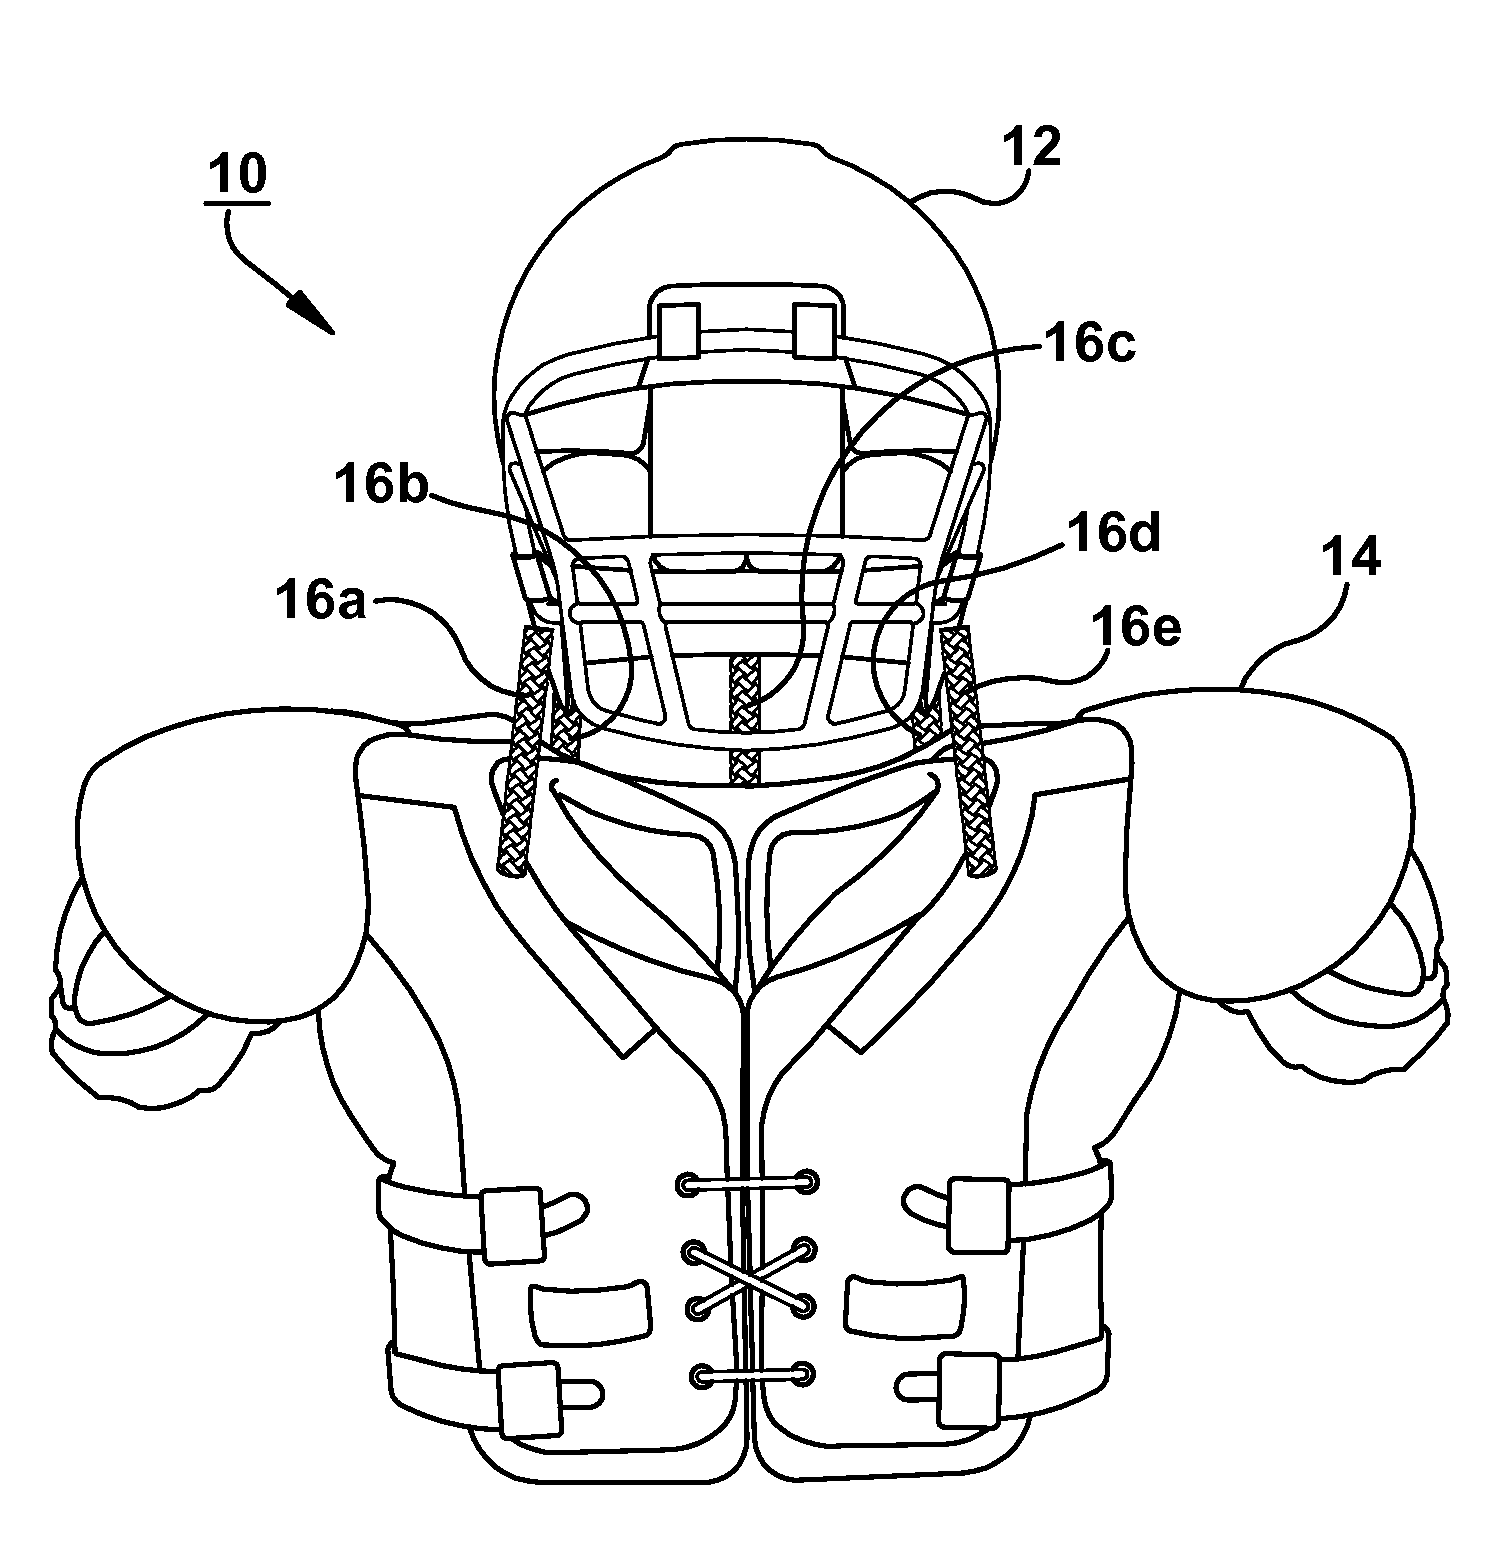 Head protection system